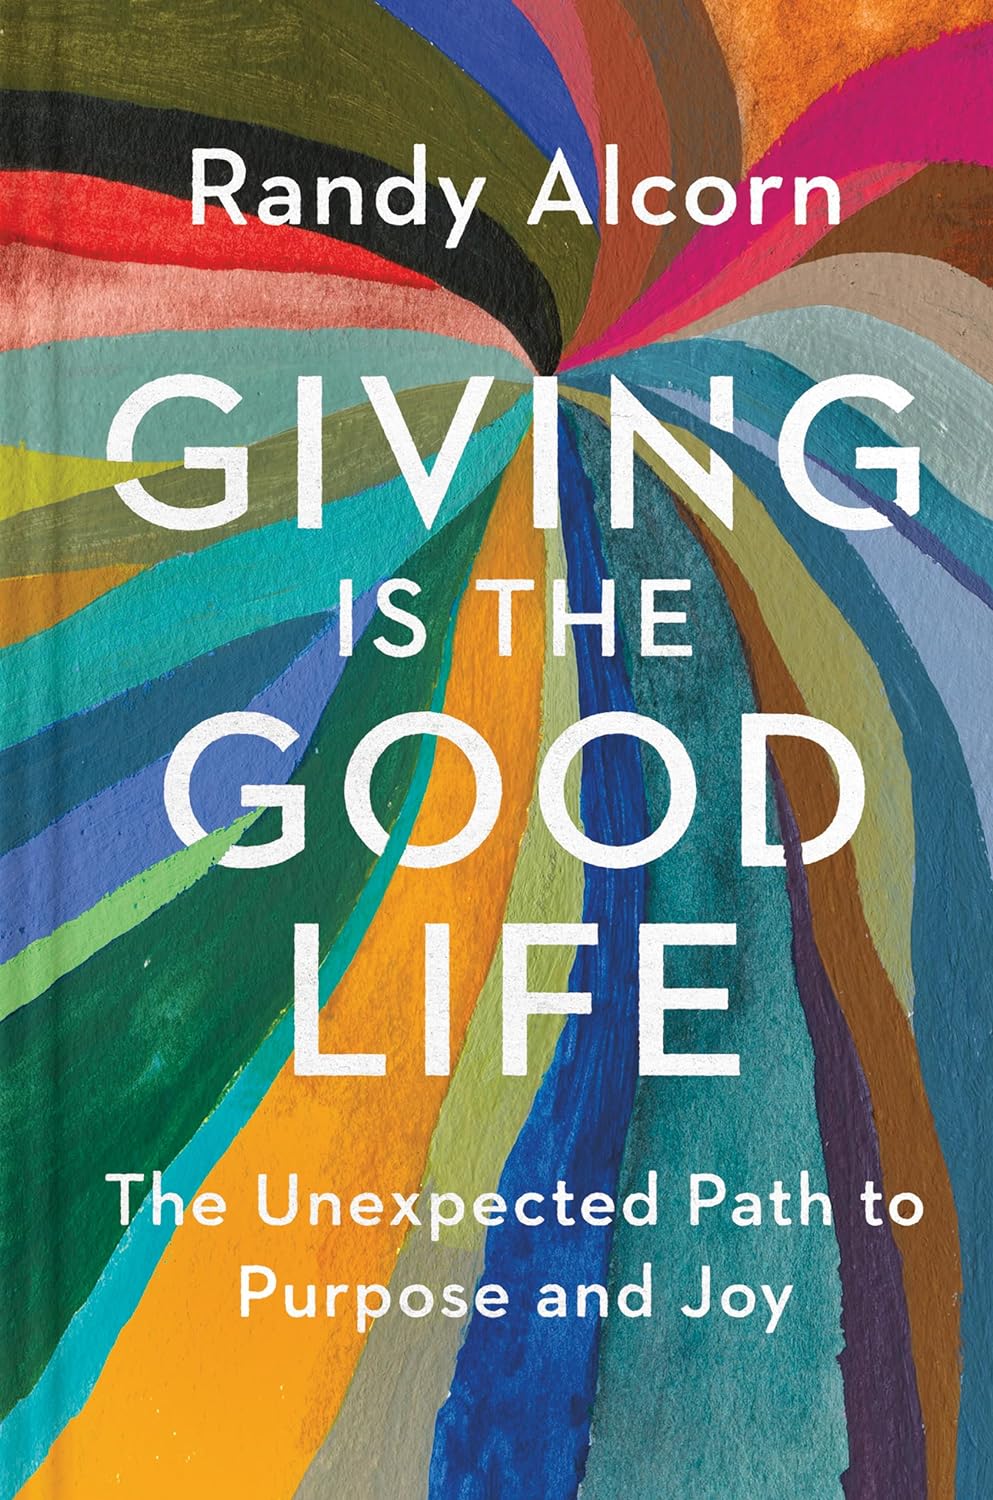 Giving is the Good Life by Randy Alcorn